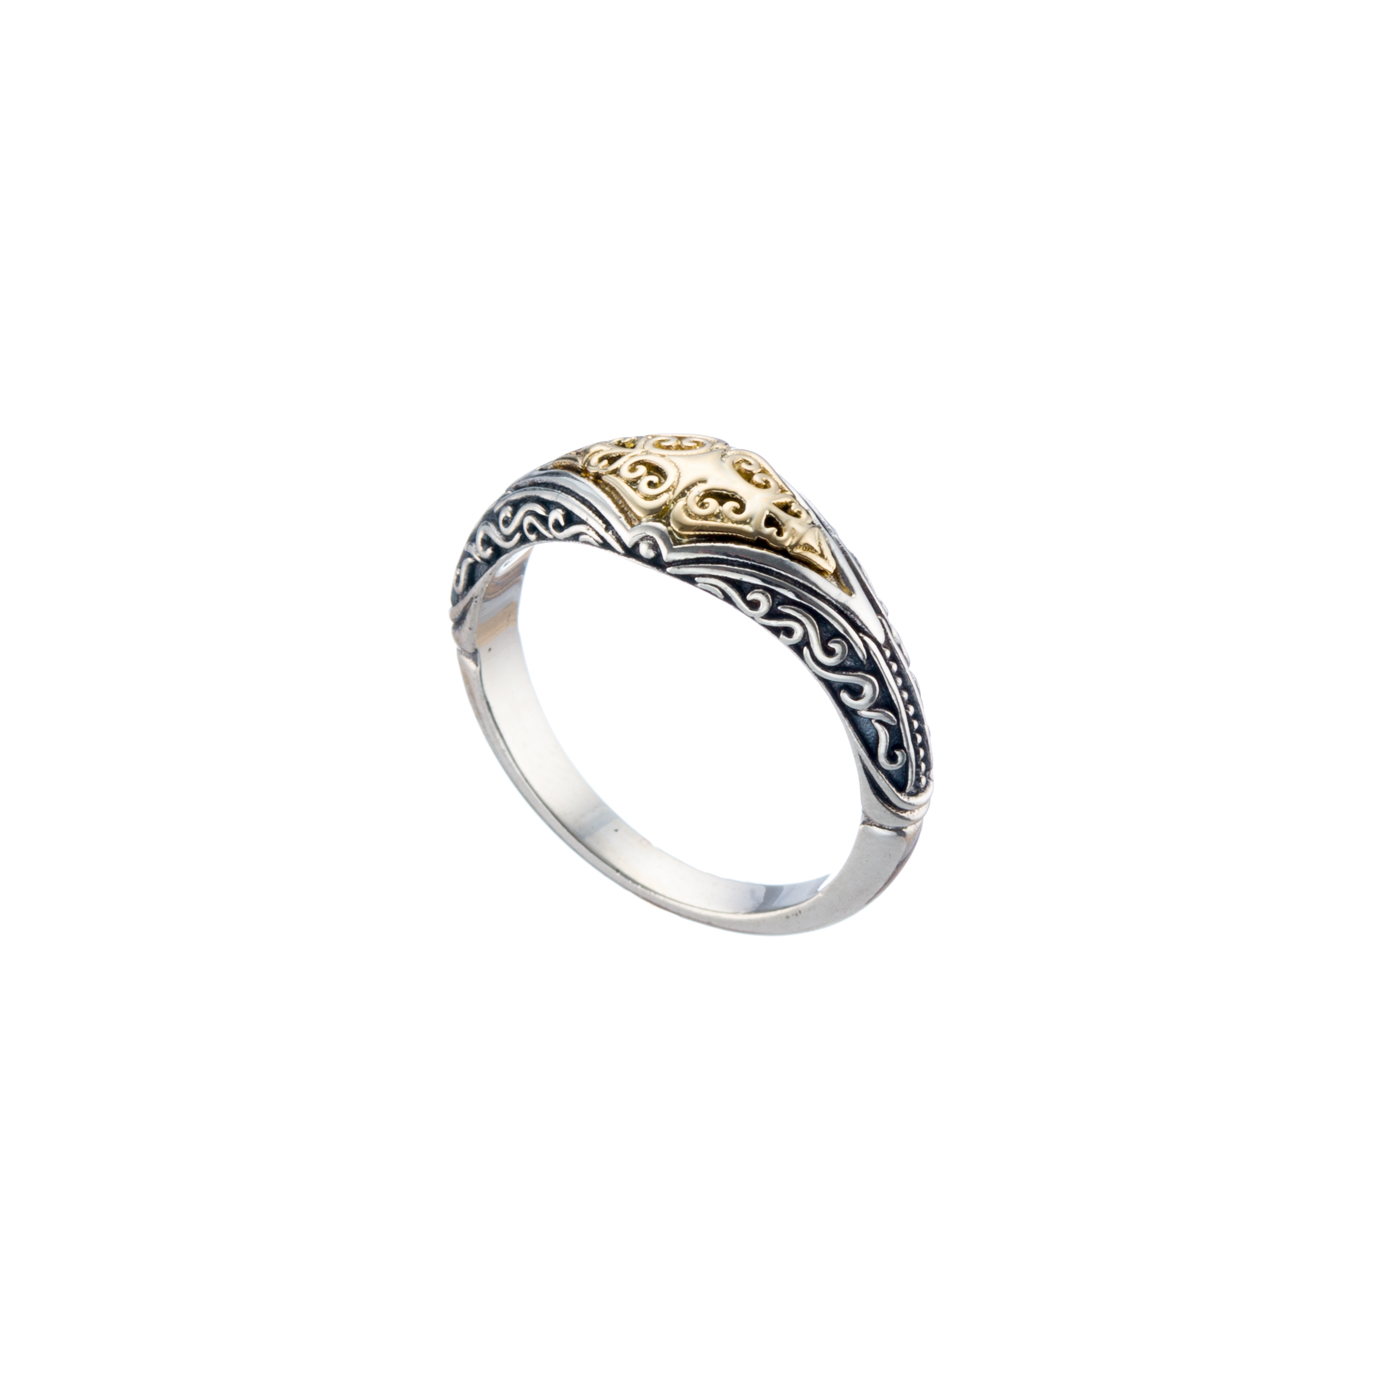 Aretousa ring in 18K Gold and Sterling Silver